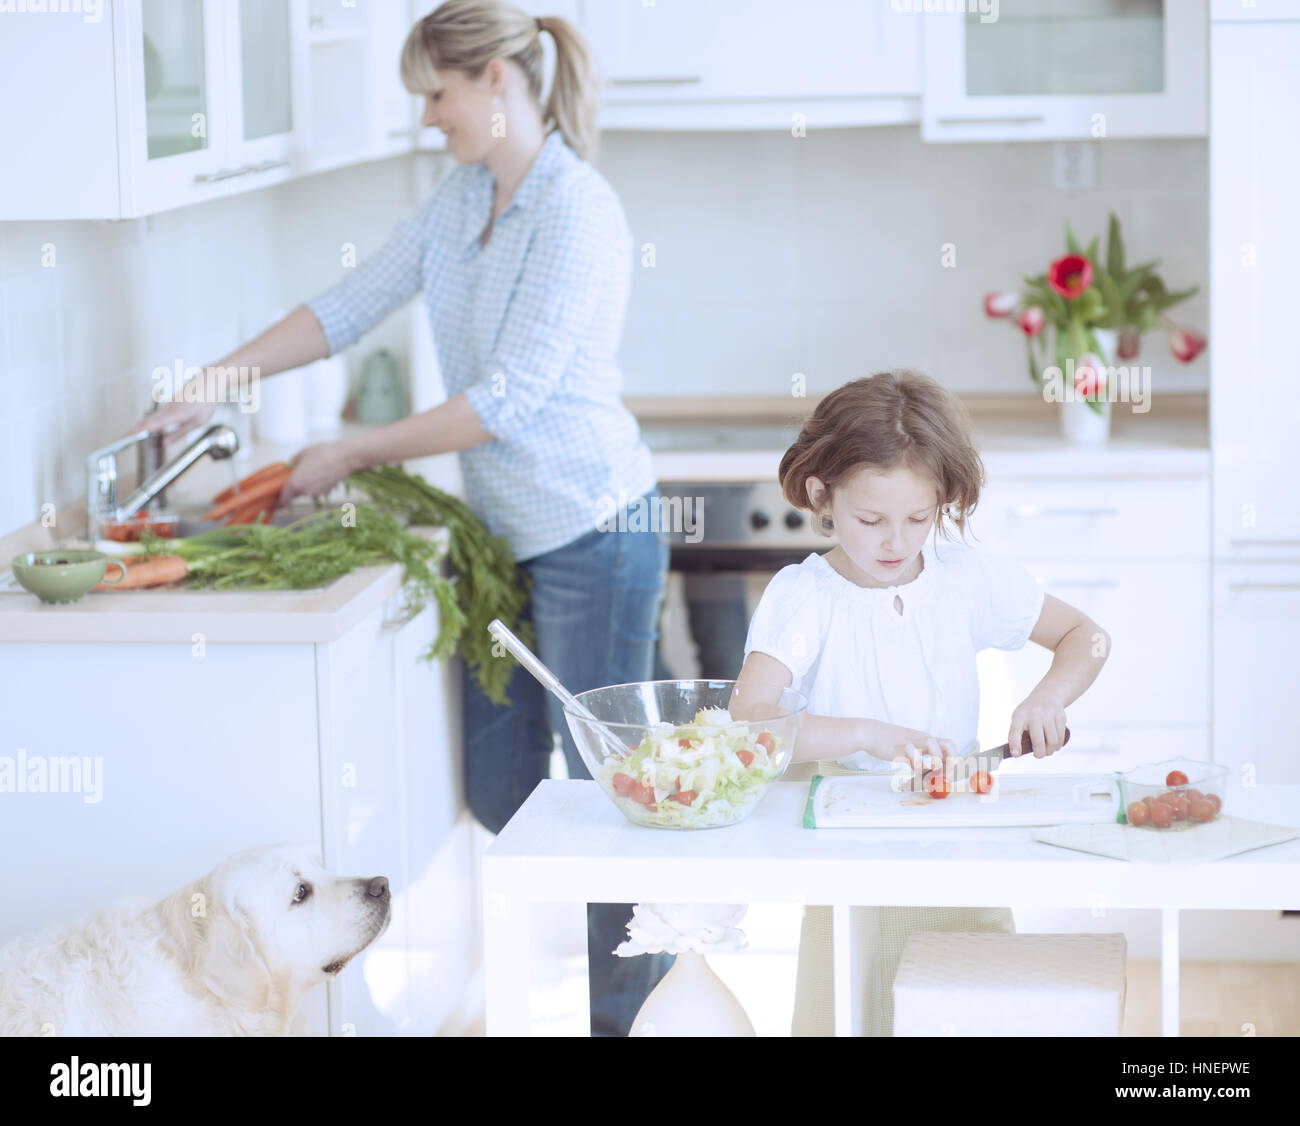 Mother and Daughter (8-9) preparing healthy meal in kitchen Stock Photo